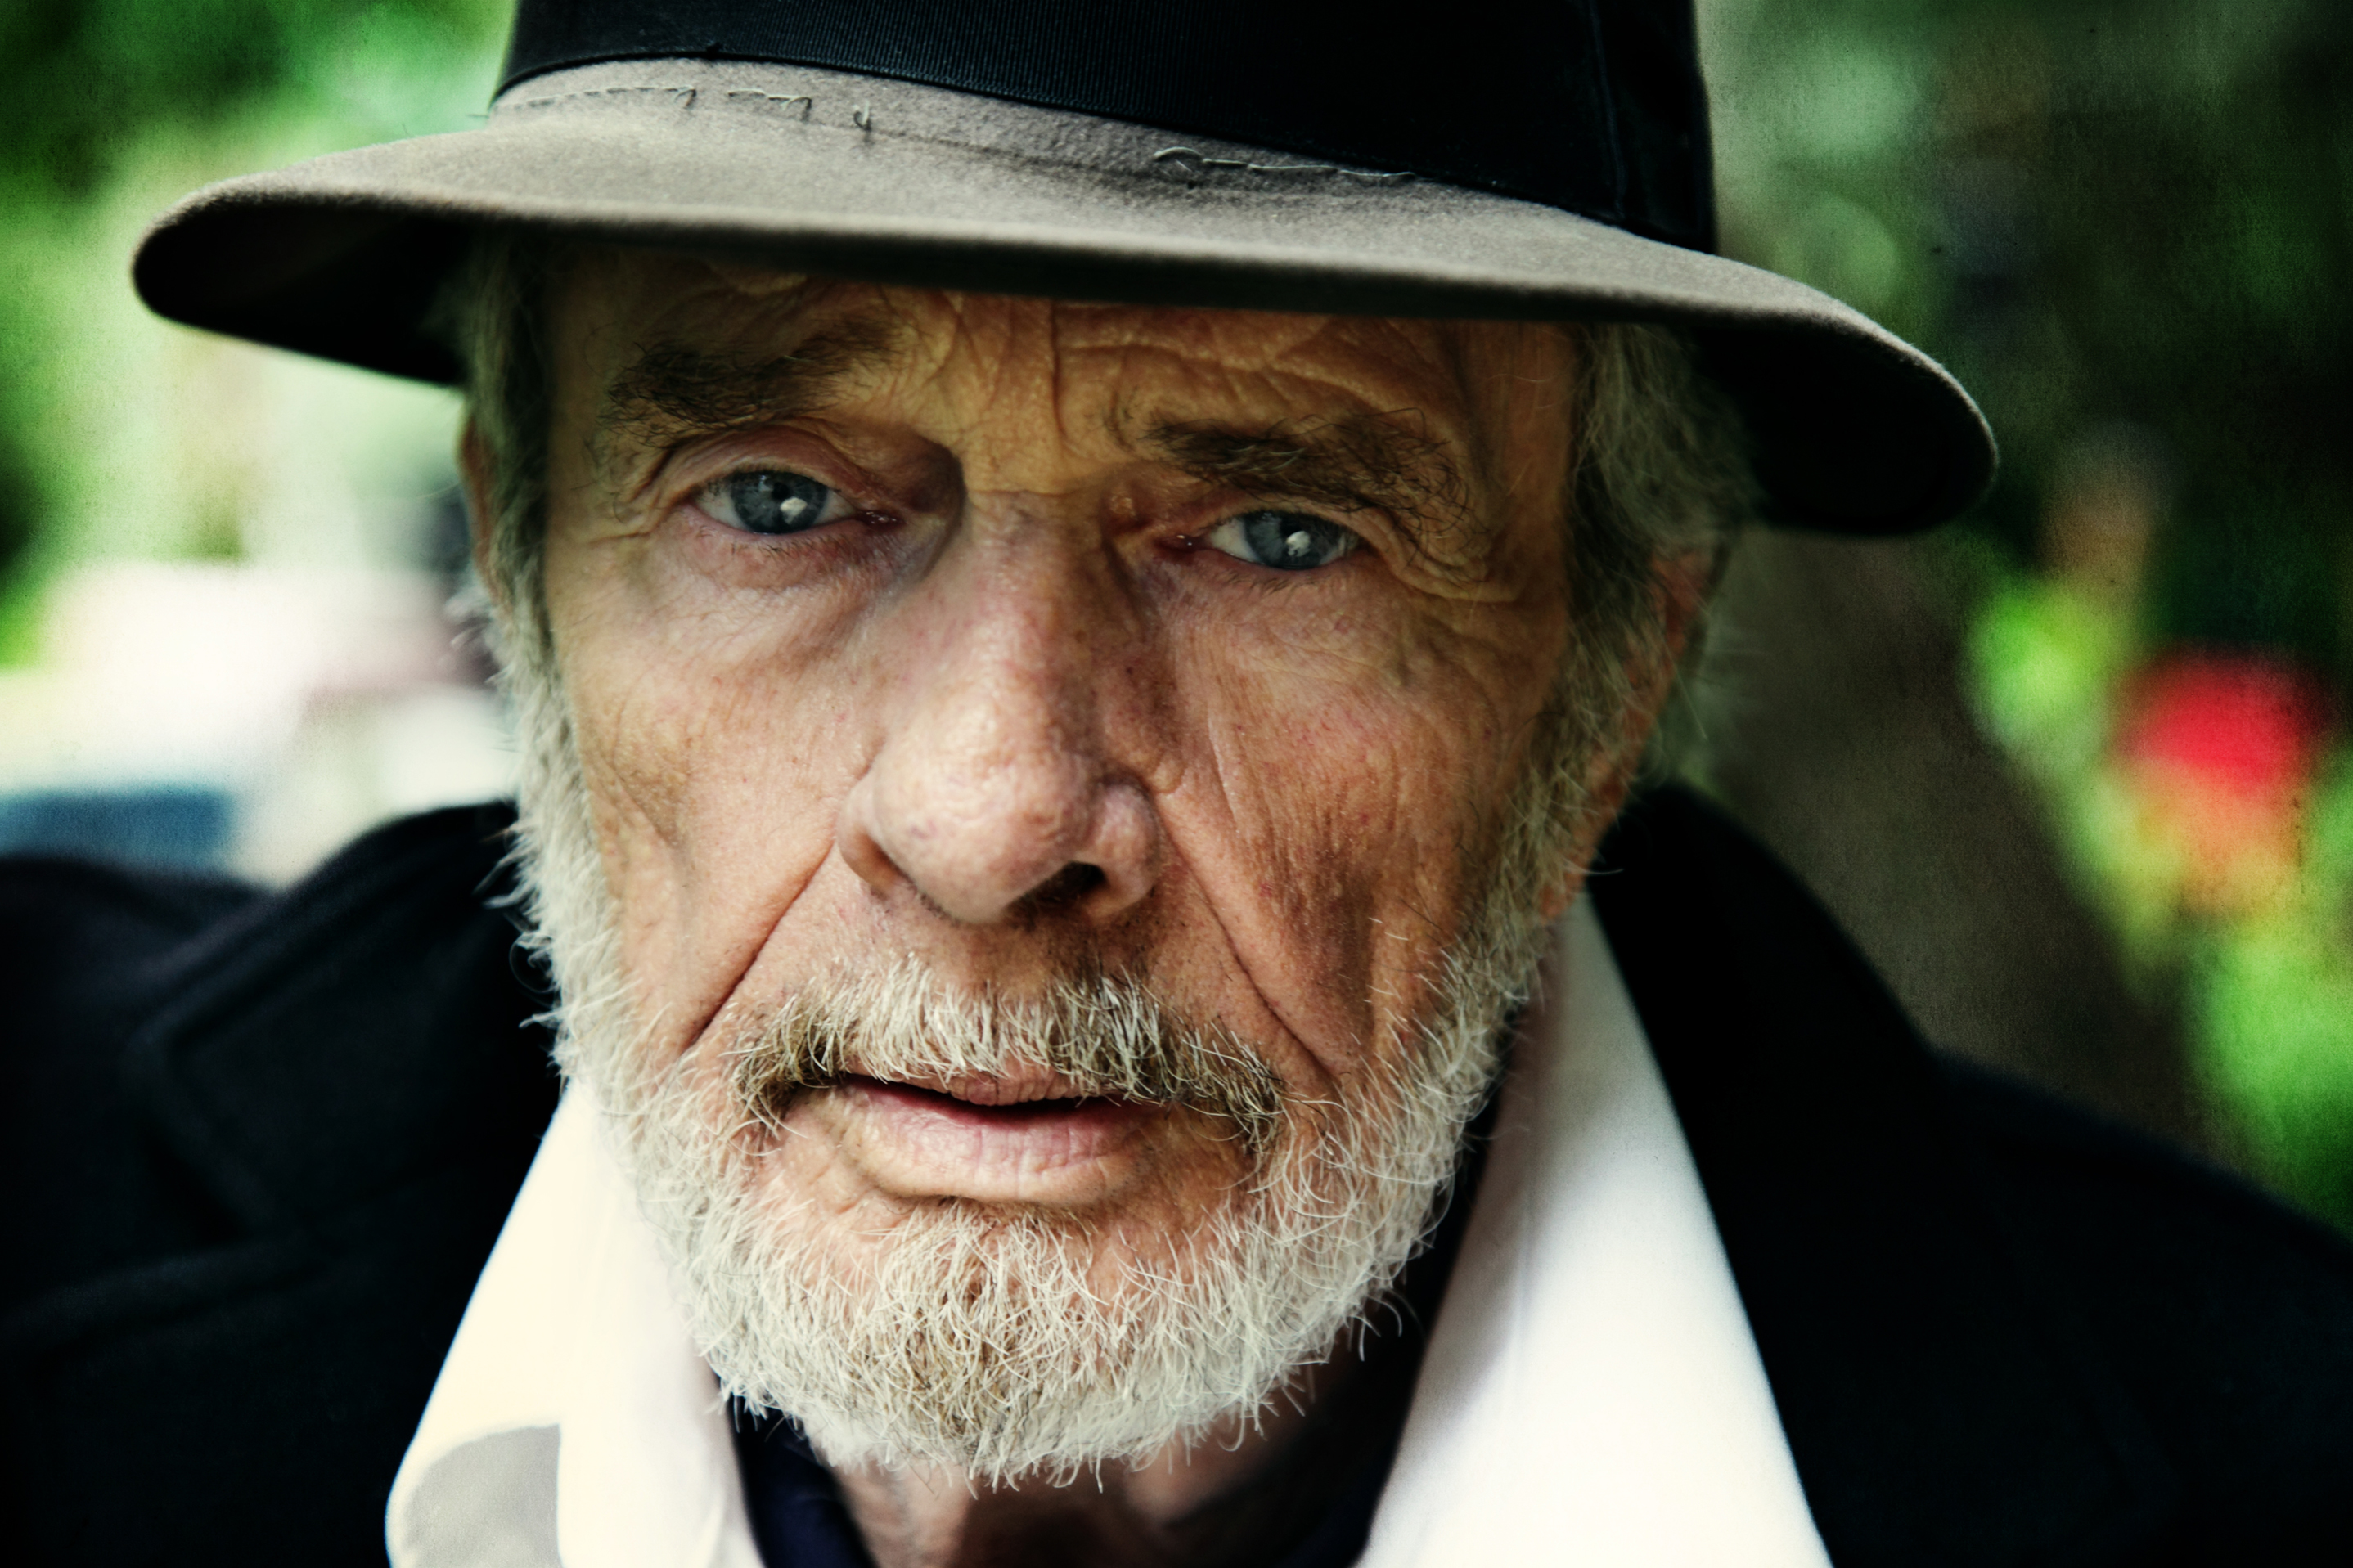 Merle Haggard dead at 79 - Listen Here Reviews